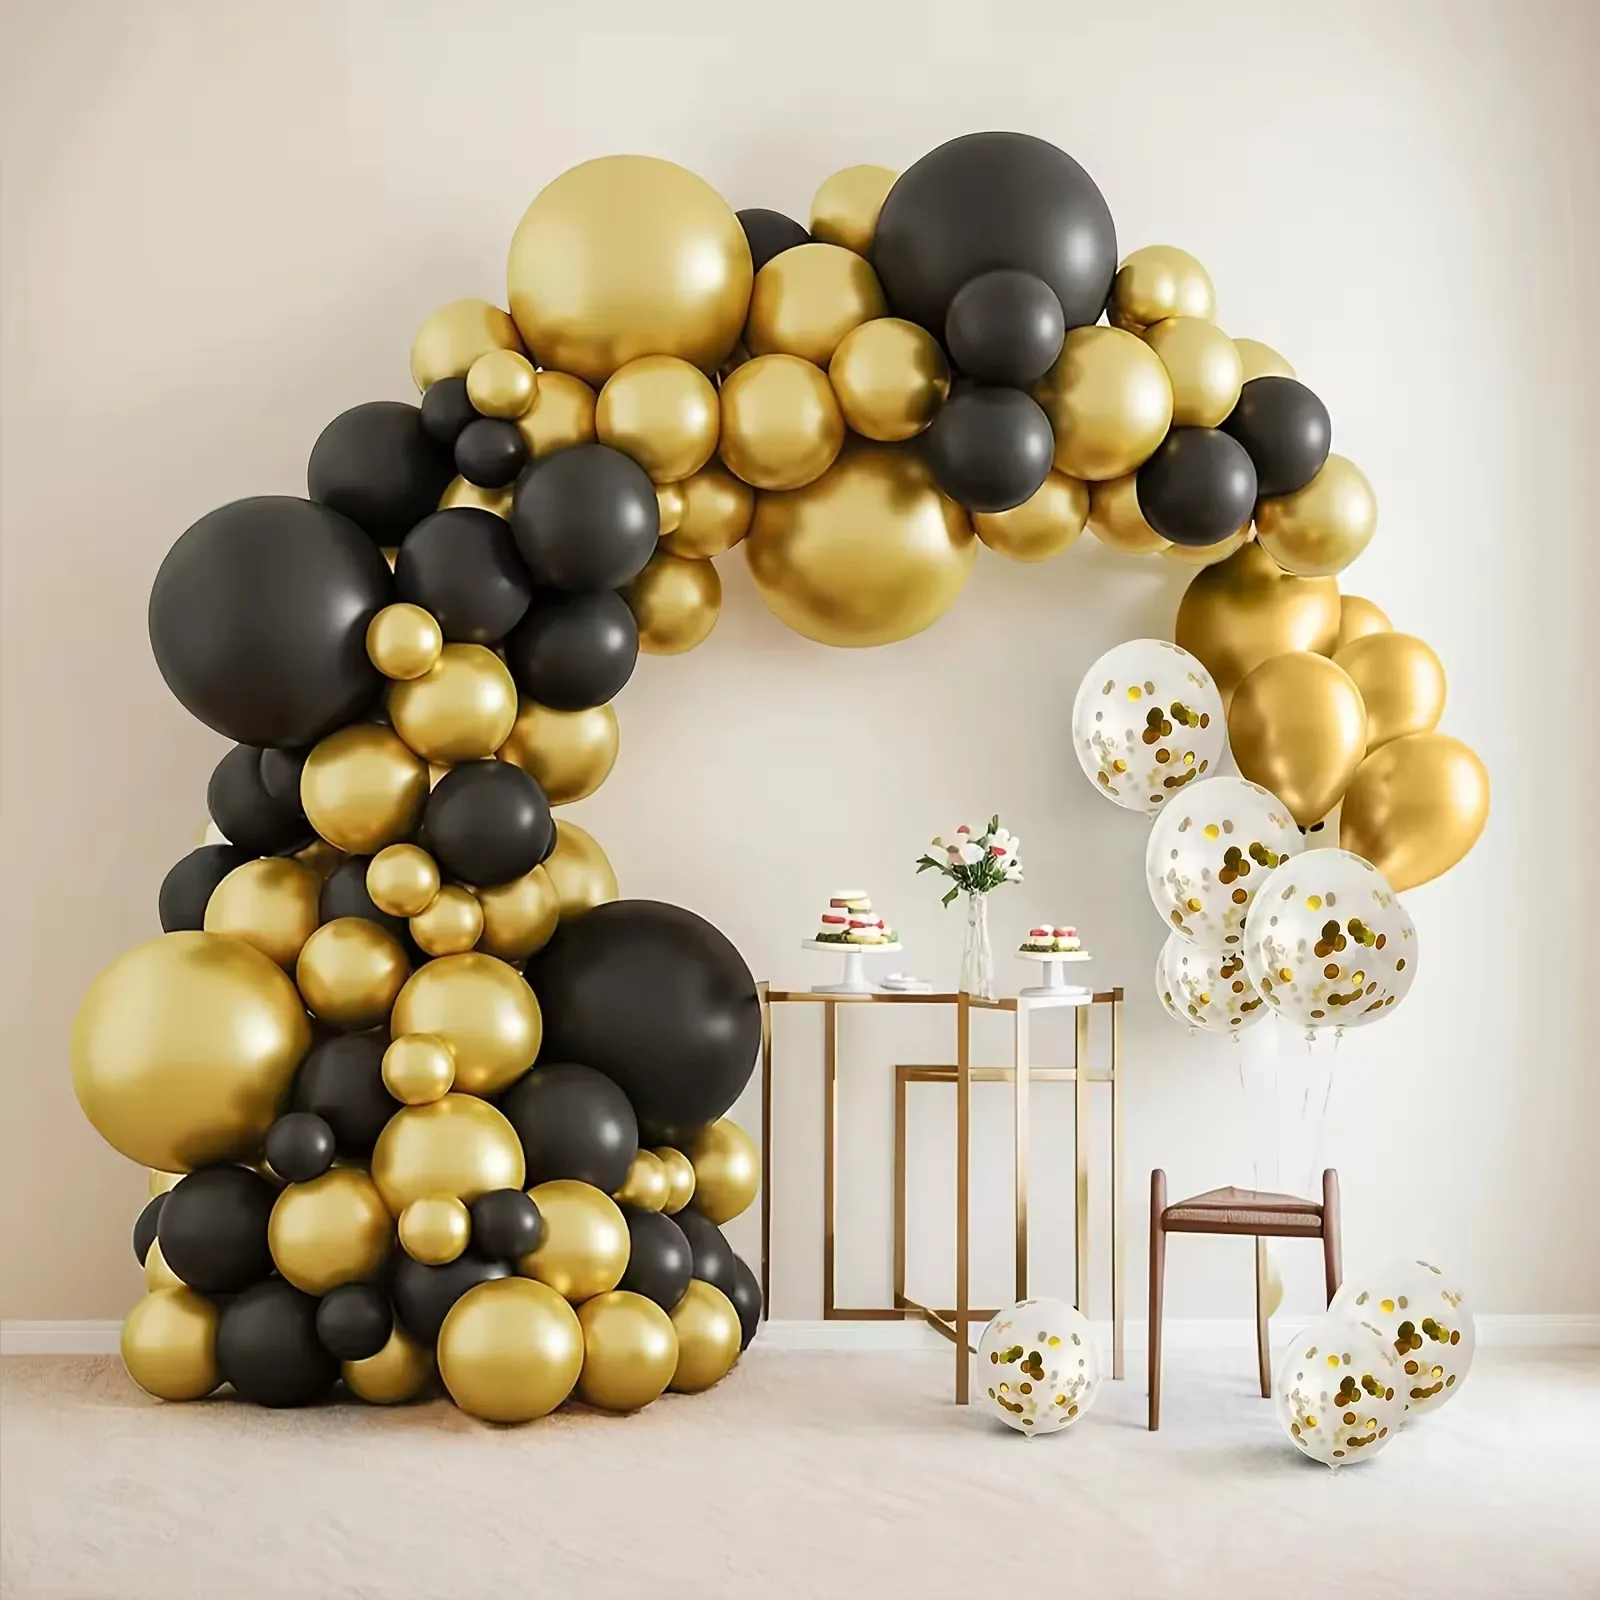 NEW ARRIVAL 127pcs Black Gold Balloon Garland Arch Kit Confetti Balloons for party decoration